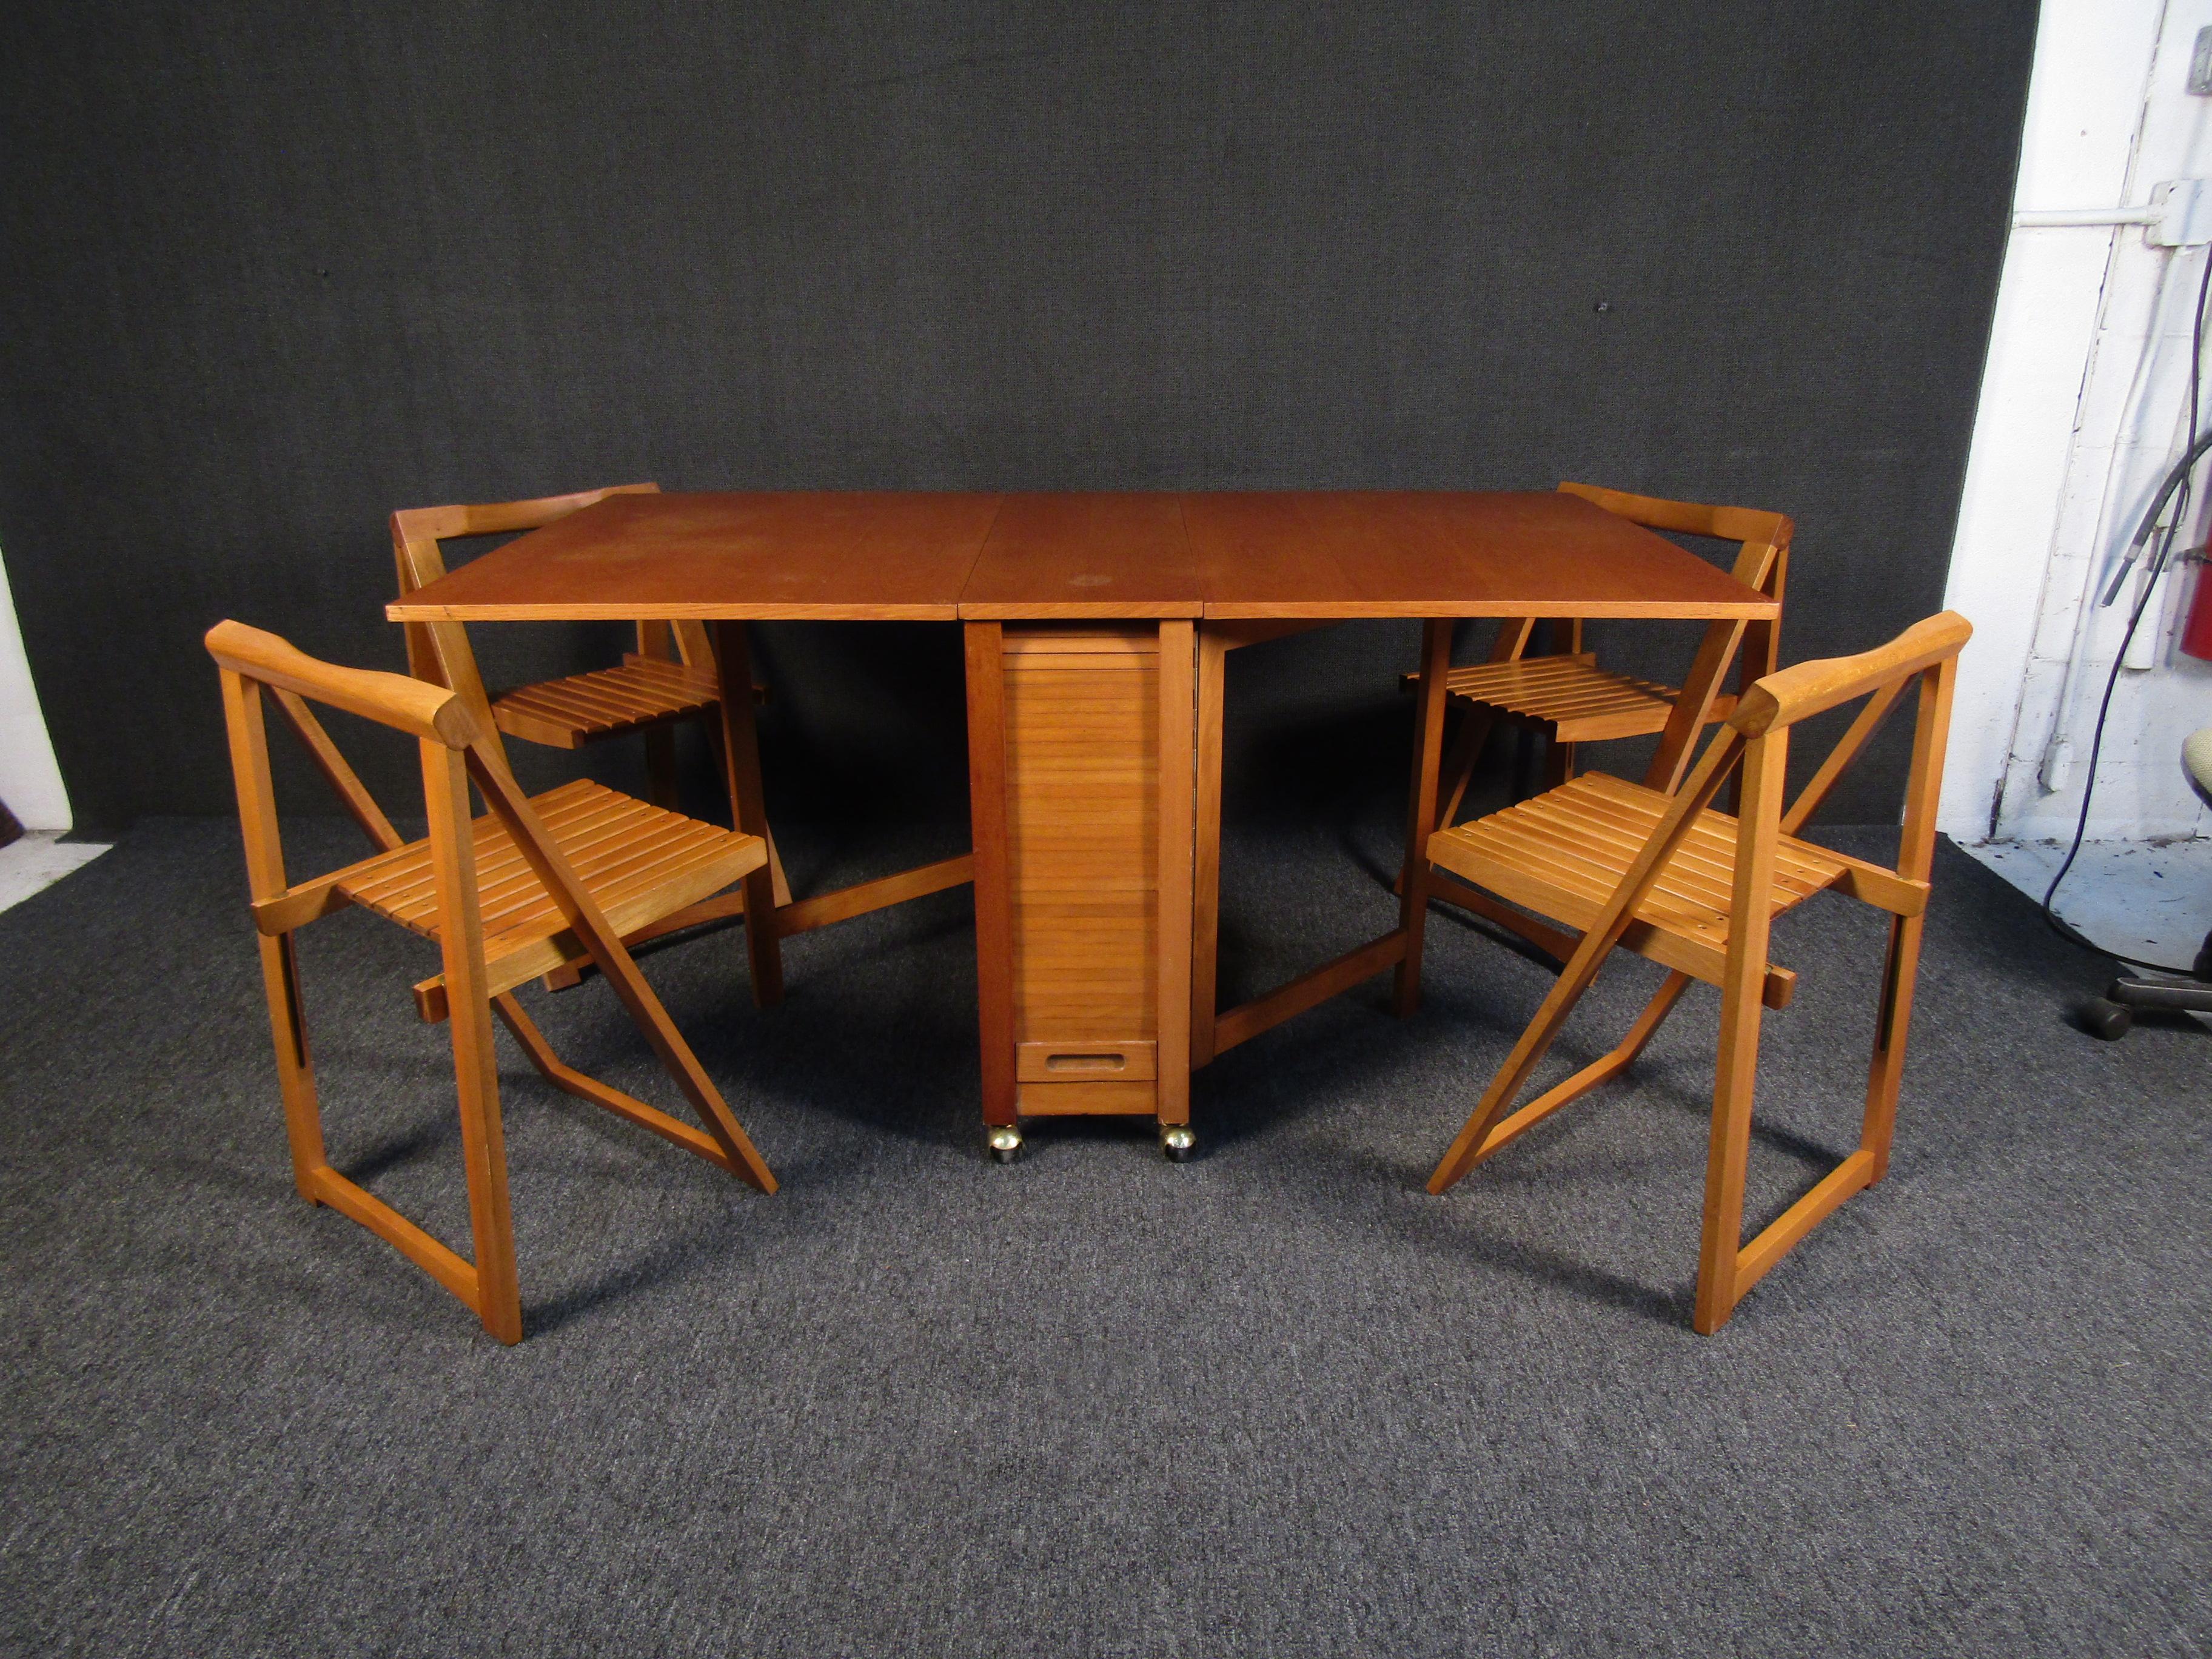 A gorgeous Mid-Century Modern style dining room set with a drop leaf table and four folding chairs. A compact folding design is complete with chairs that store away underneath the table. Rich wood grain makes this set an elegant addition to any